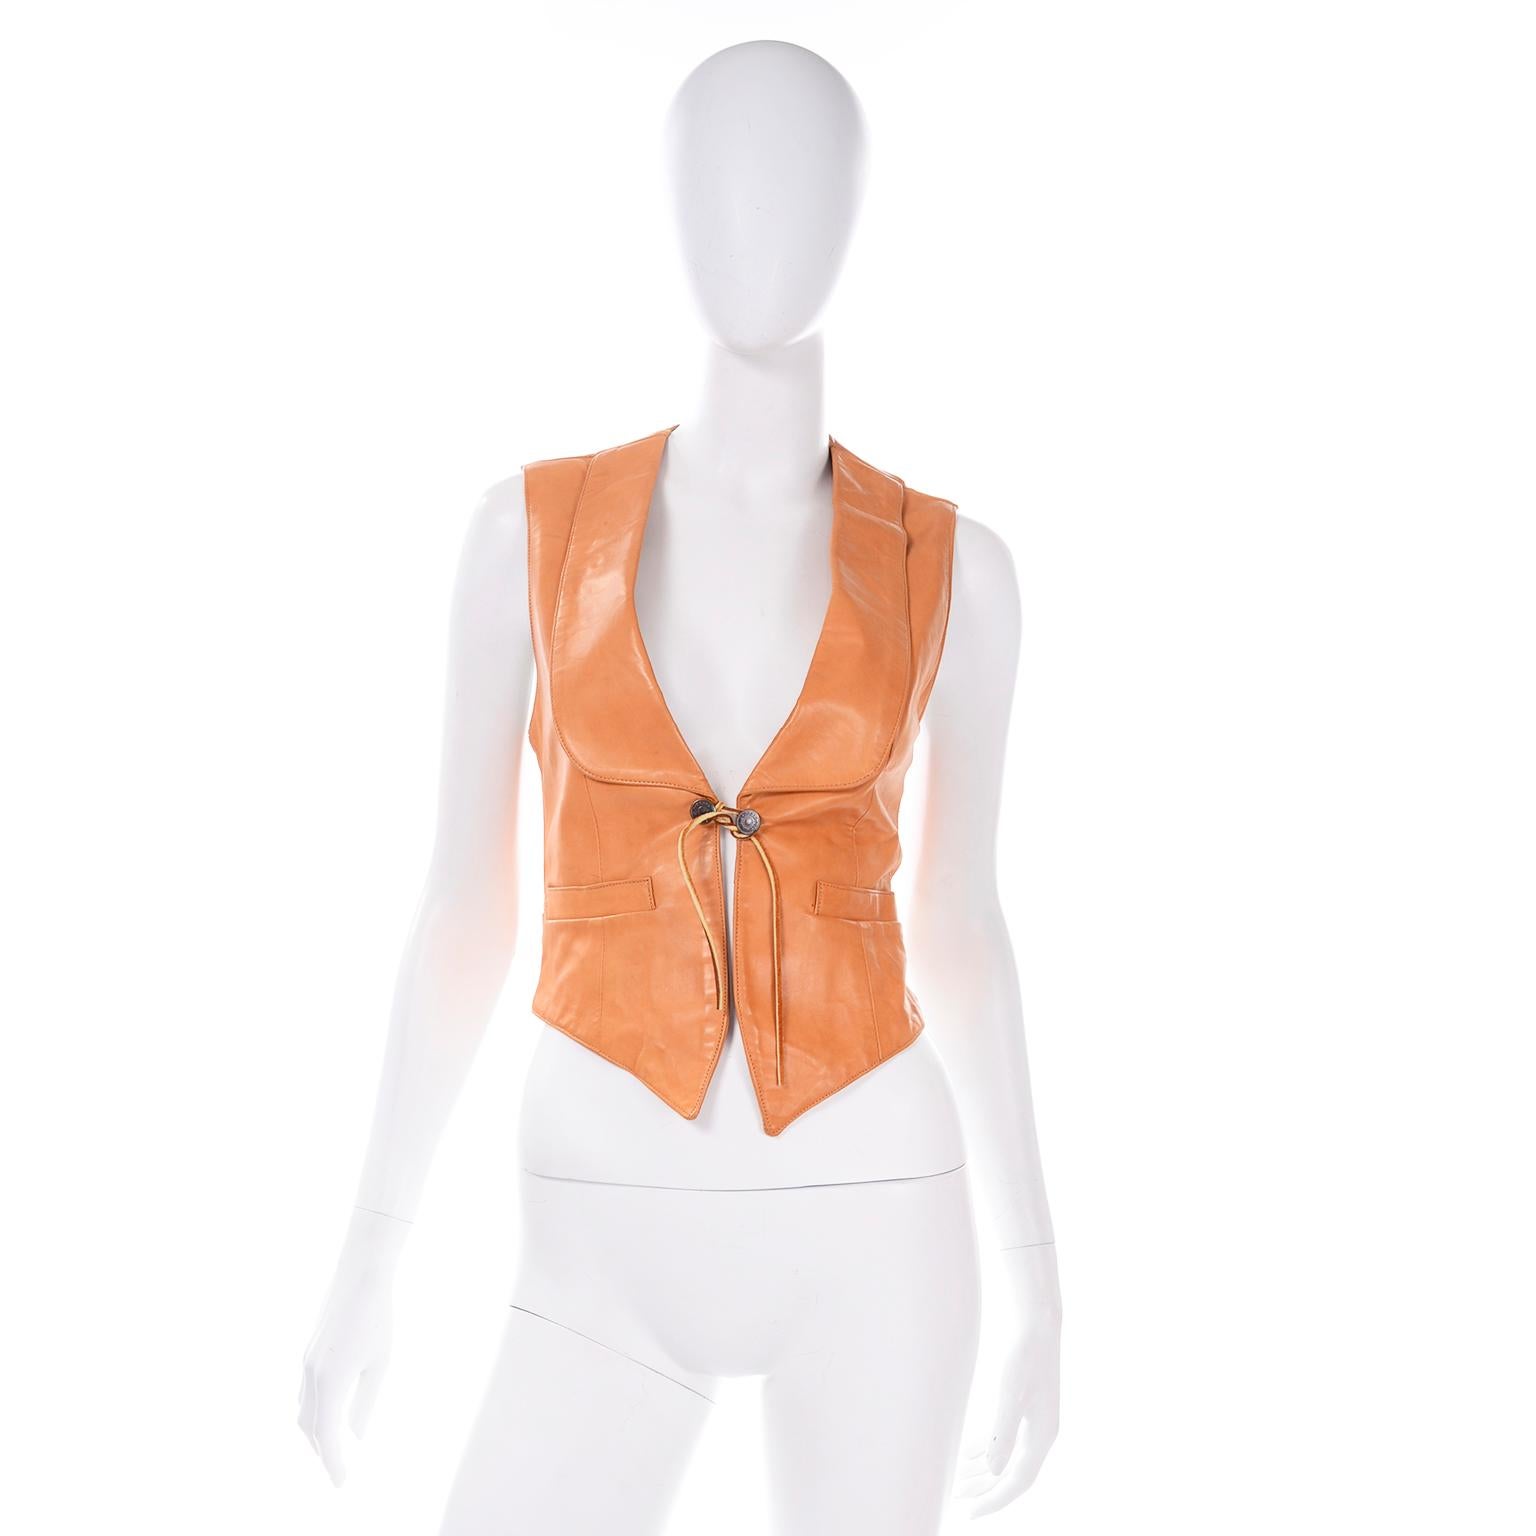 We are so in love with this amazing vintage lambskin leather vest from Ralph Lauren's western wear collection. This vest is made of a terracotta brown genuine lambskin and fully lined. There are two front pockets, a notch collar,  two metal branded